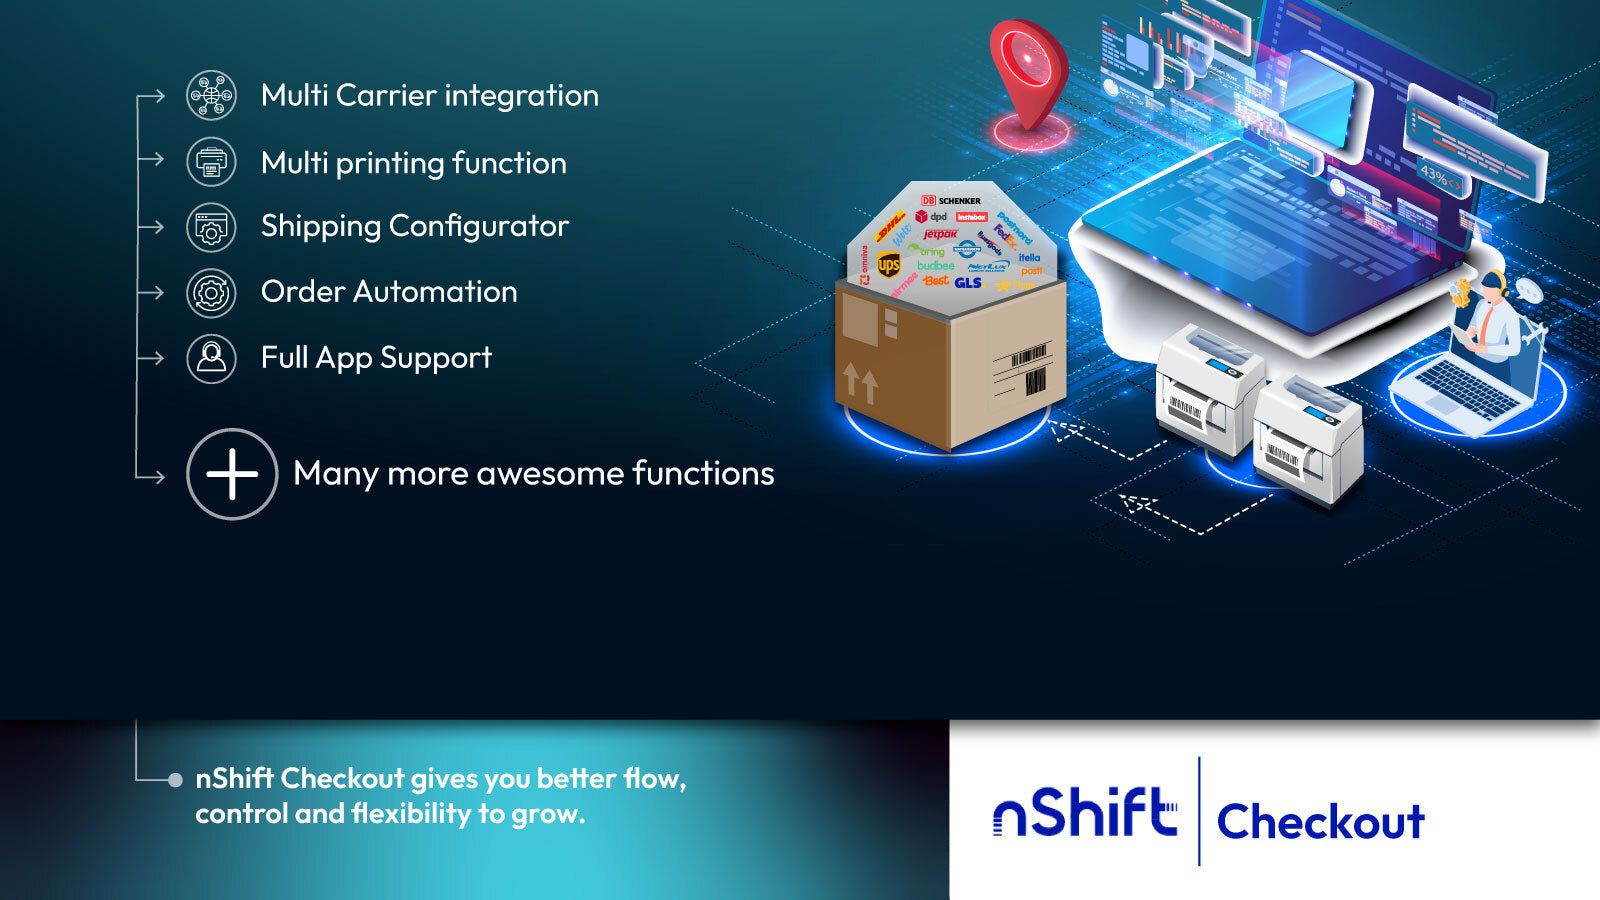 nShift Checkout multi carrier app with 100+ carriers